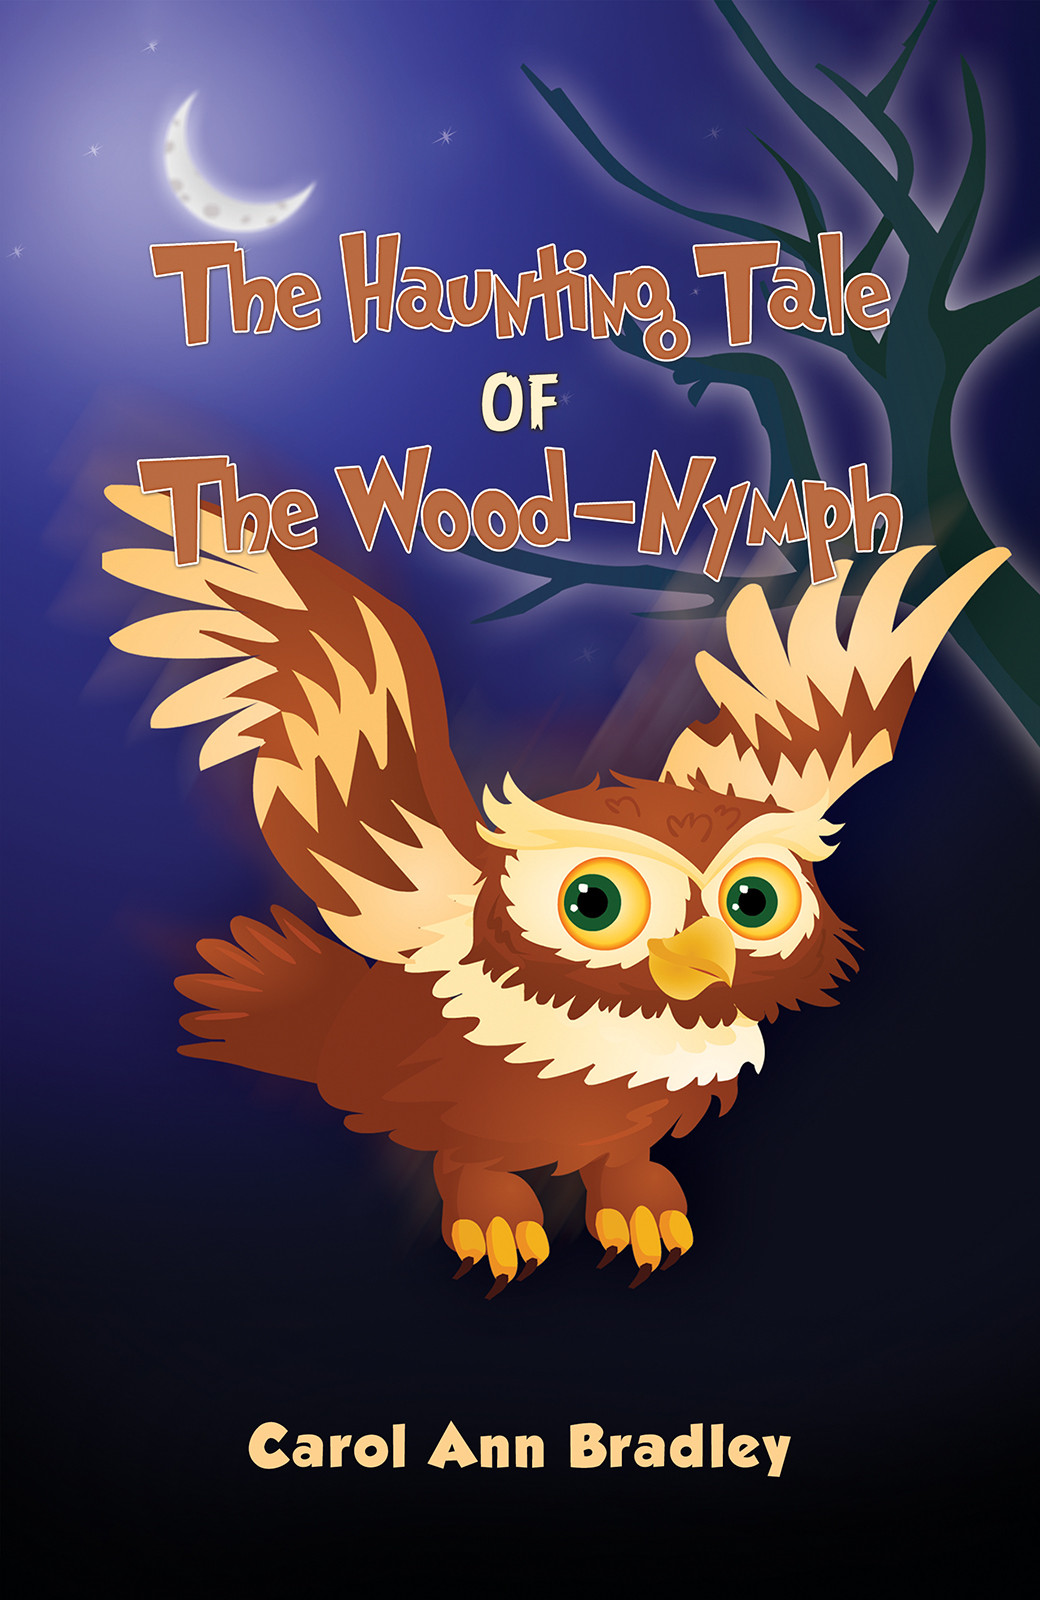 The Haunting Tale of The Wood-Nymph